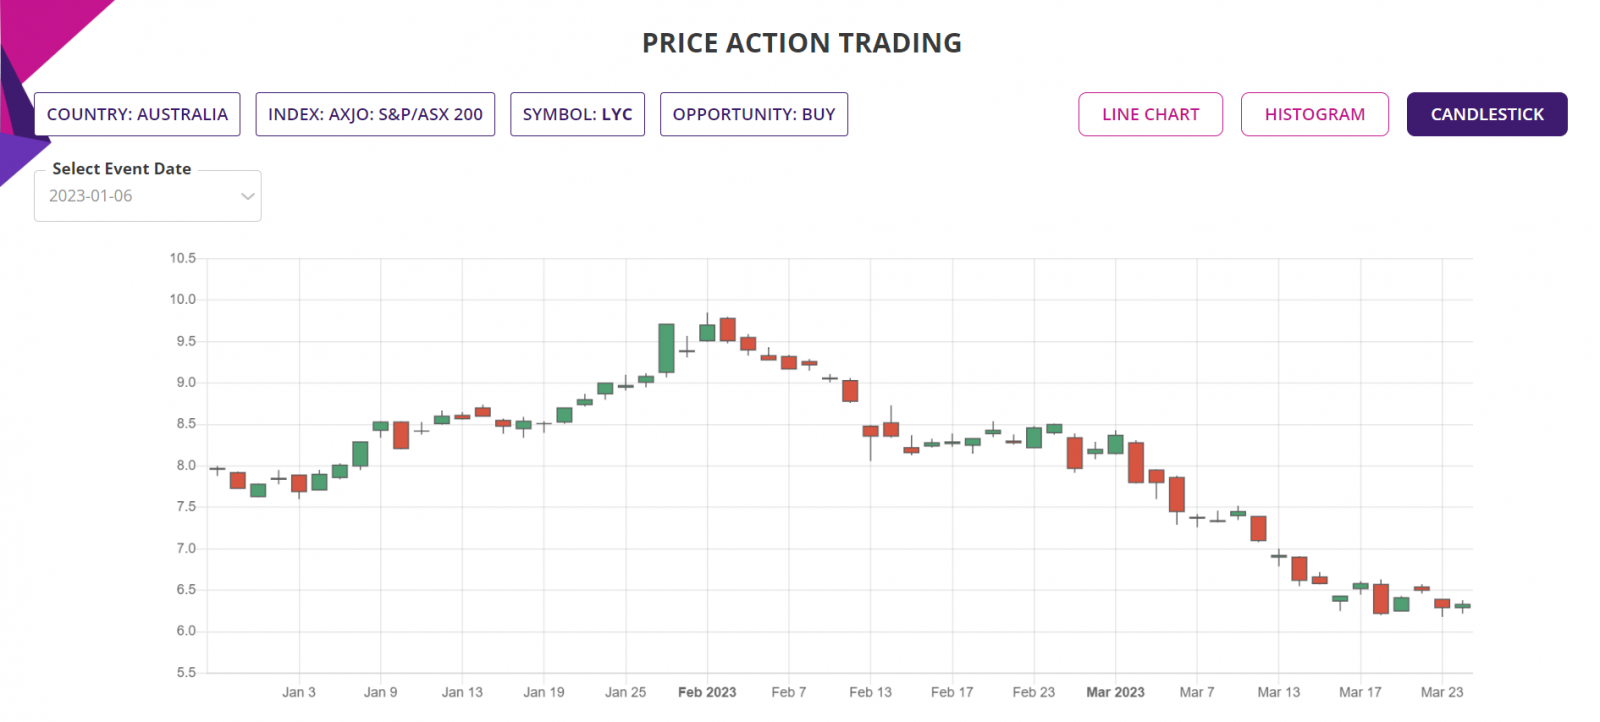 Price action trading strategy, Detailed report, Candlestick chart, ASX200 Stocks